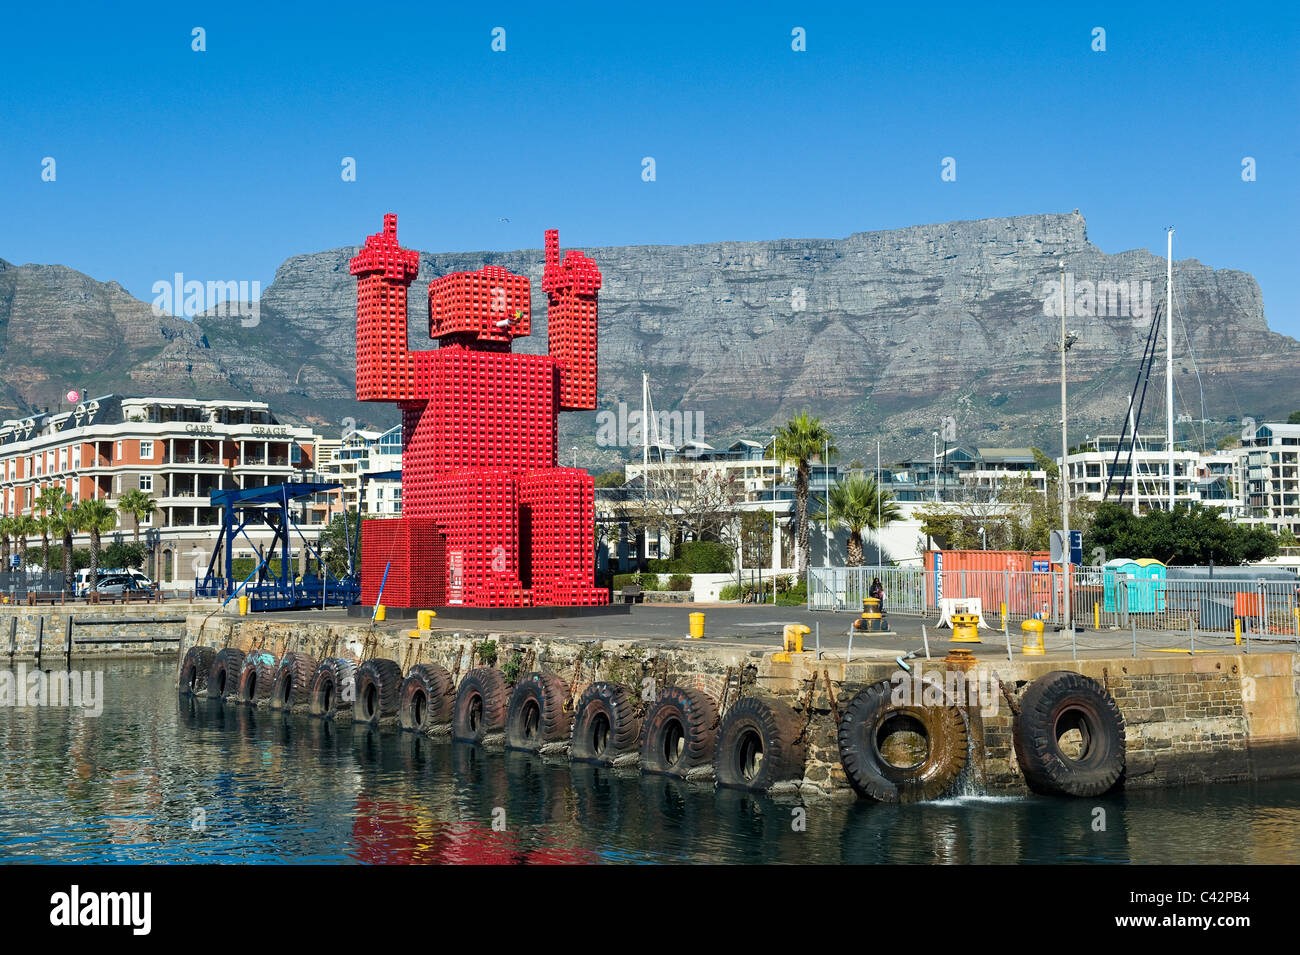 Elliot The Crate Fan a symbol of recycling built from plastic crates, 2010 FIFA World Cup, V&A Waterfront Cape Town South Africa Stock Photo